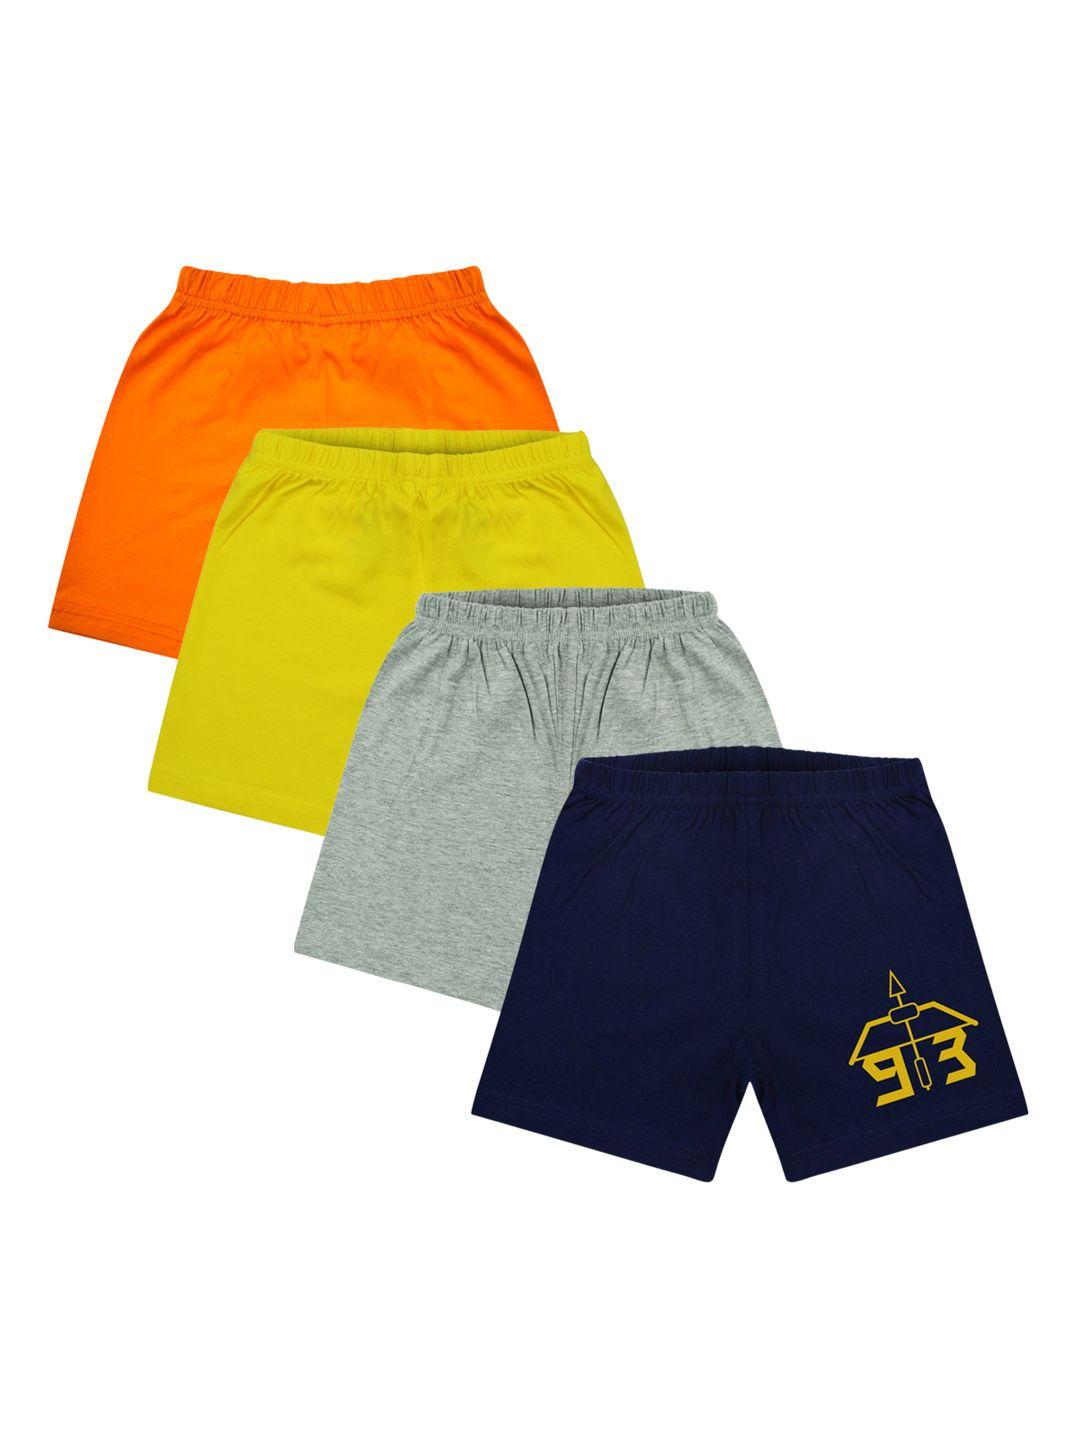 silver-fang-boys-pack-of-4-cotton-shorts